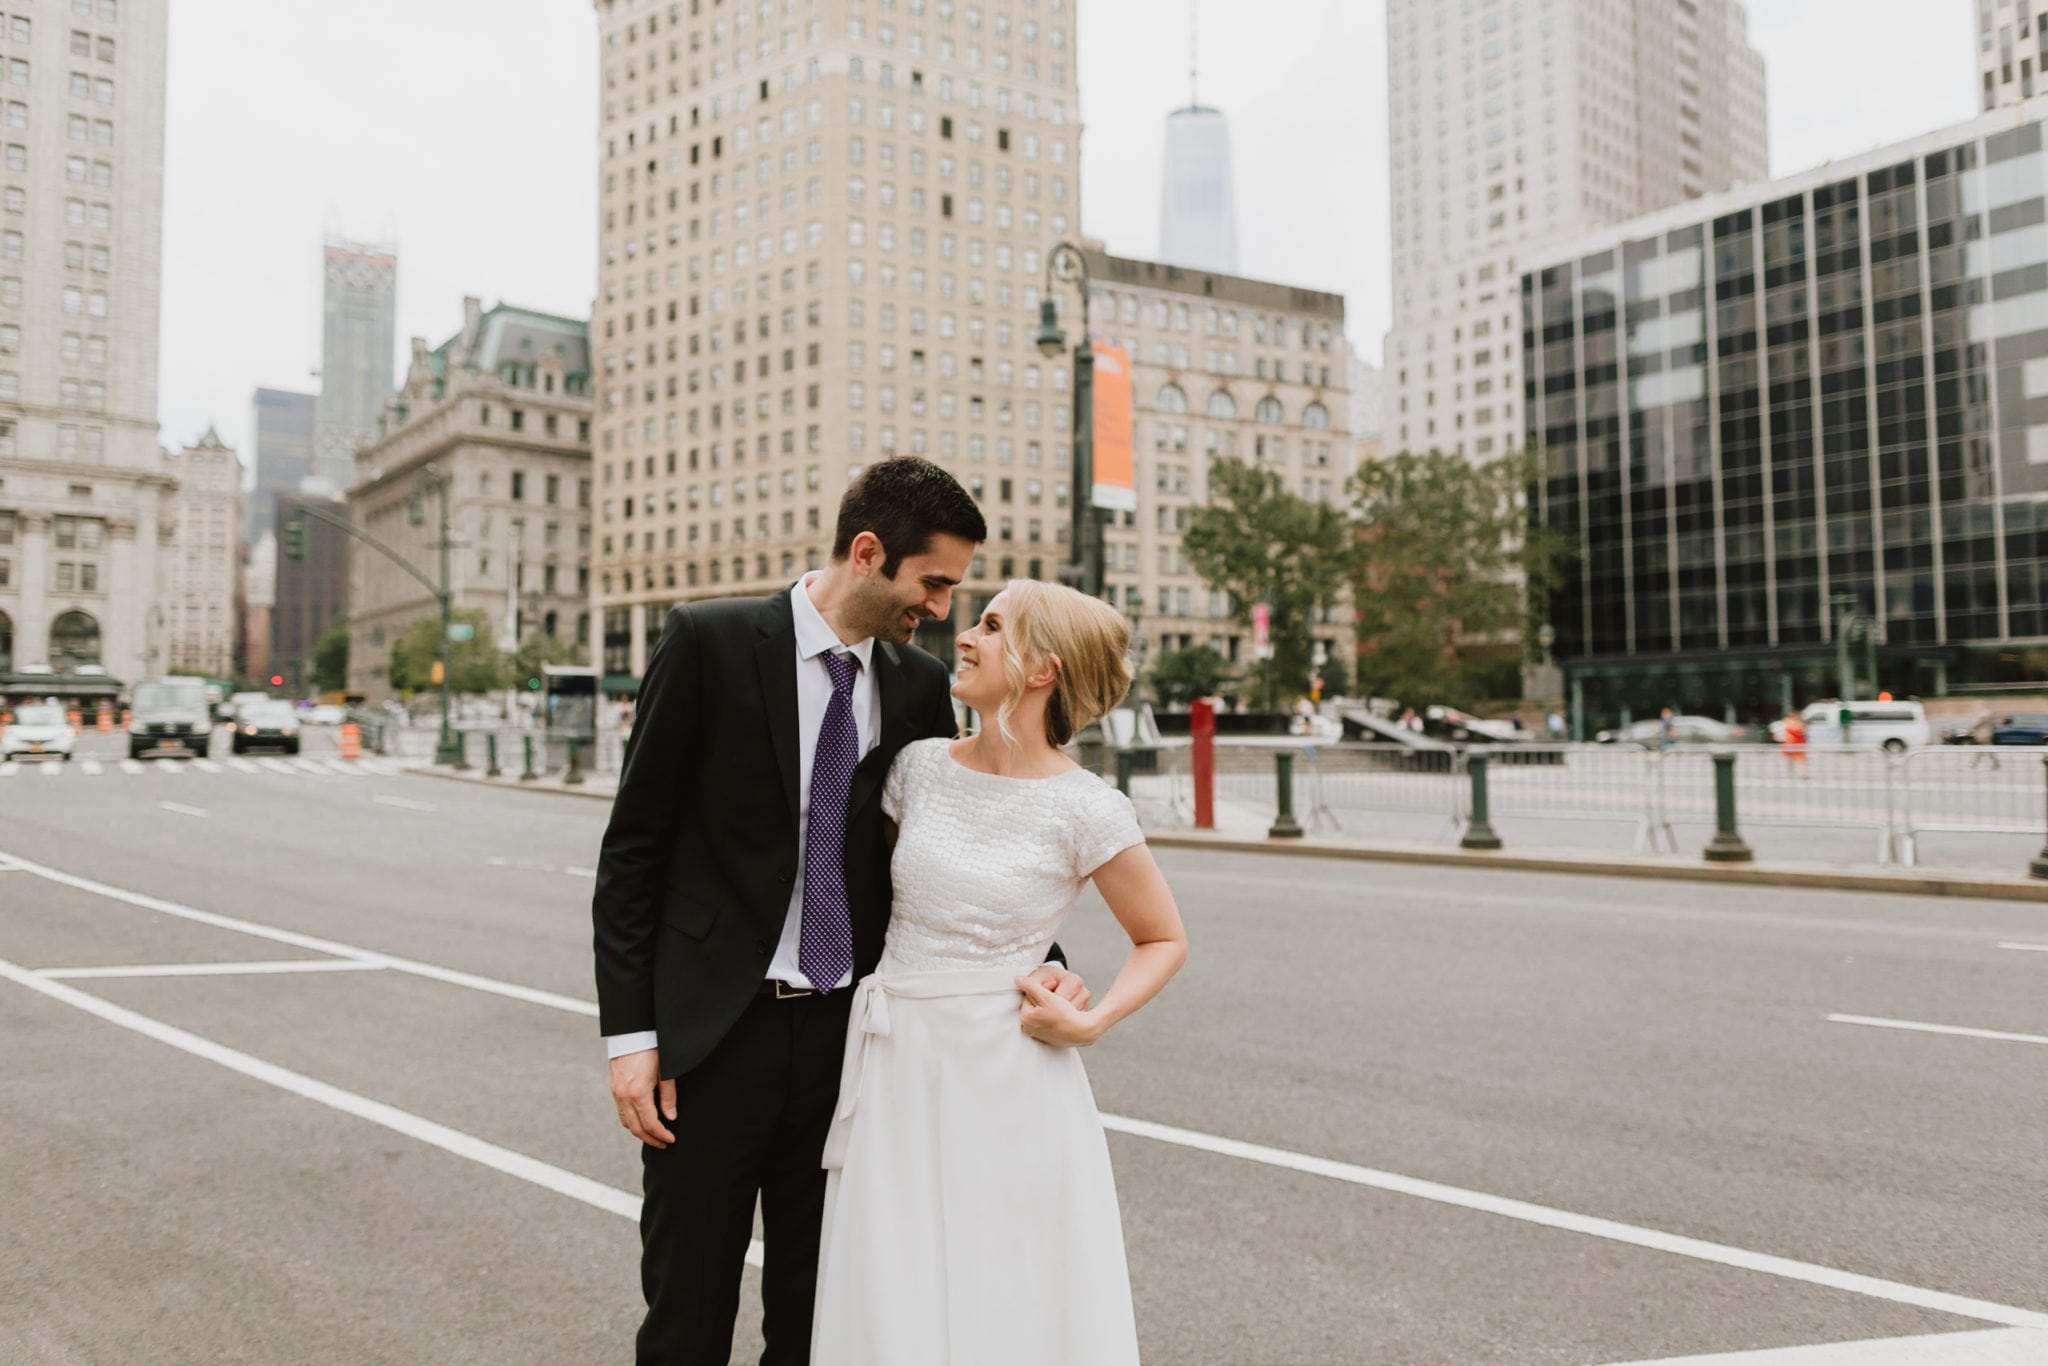 NYC City Hall wedding photos in downtown NYC